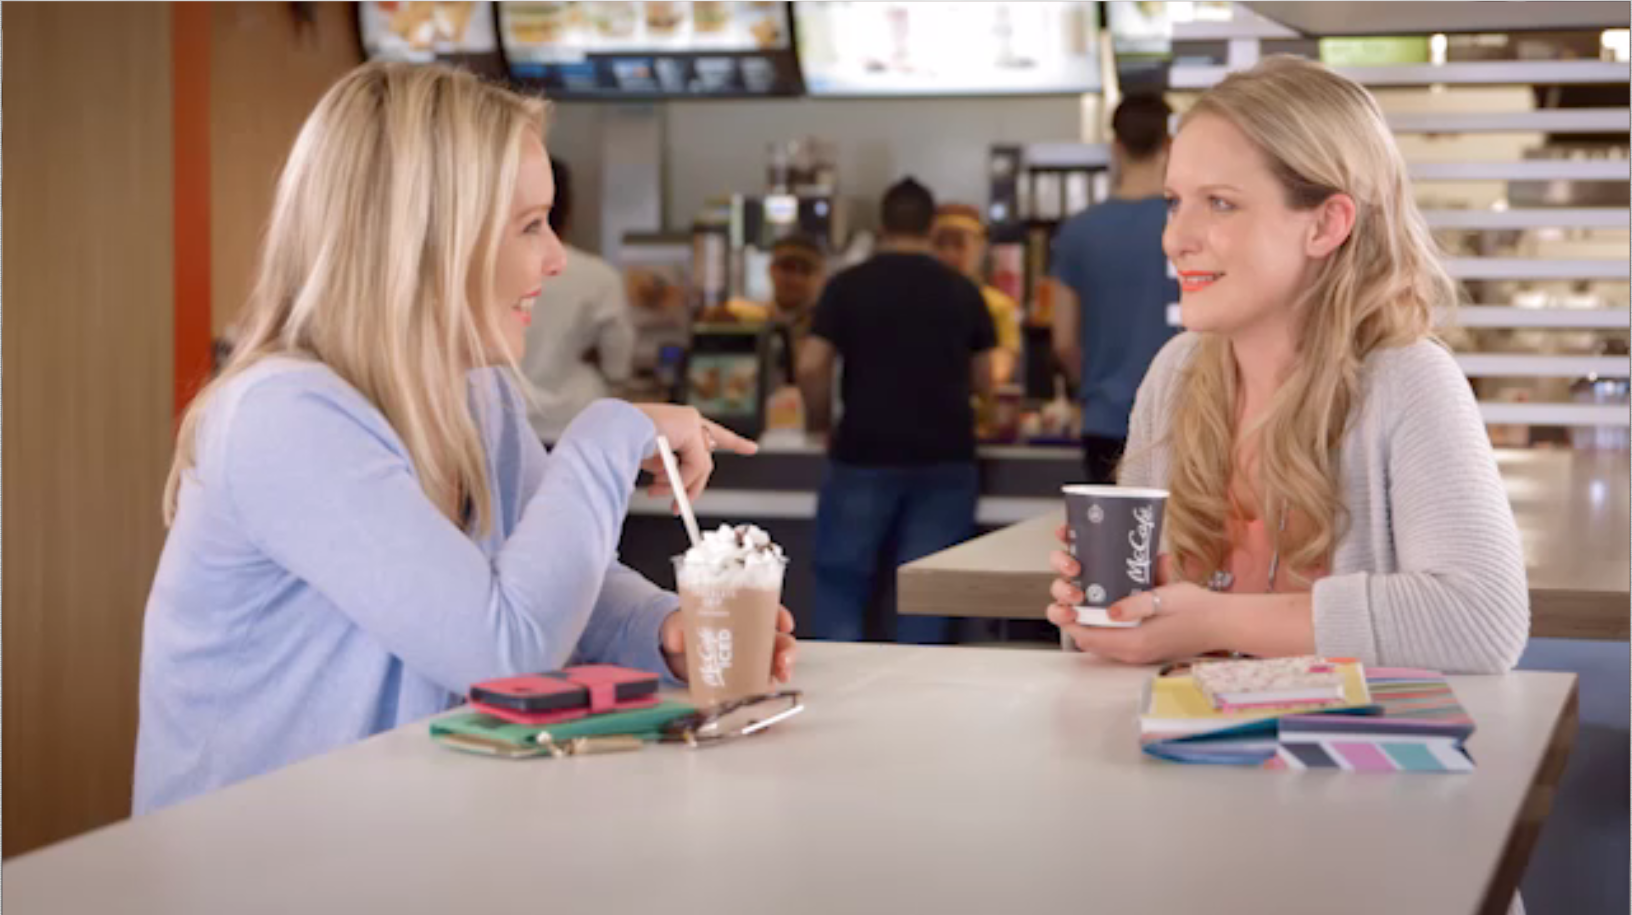 Two women chat over a McCafe drink